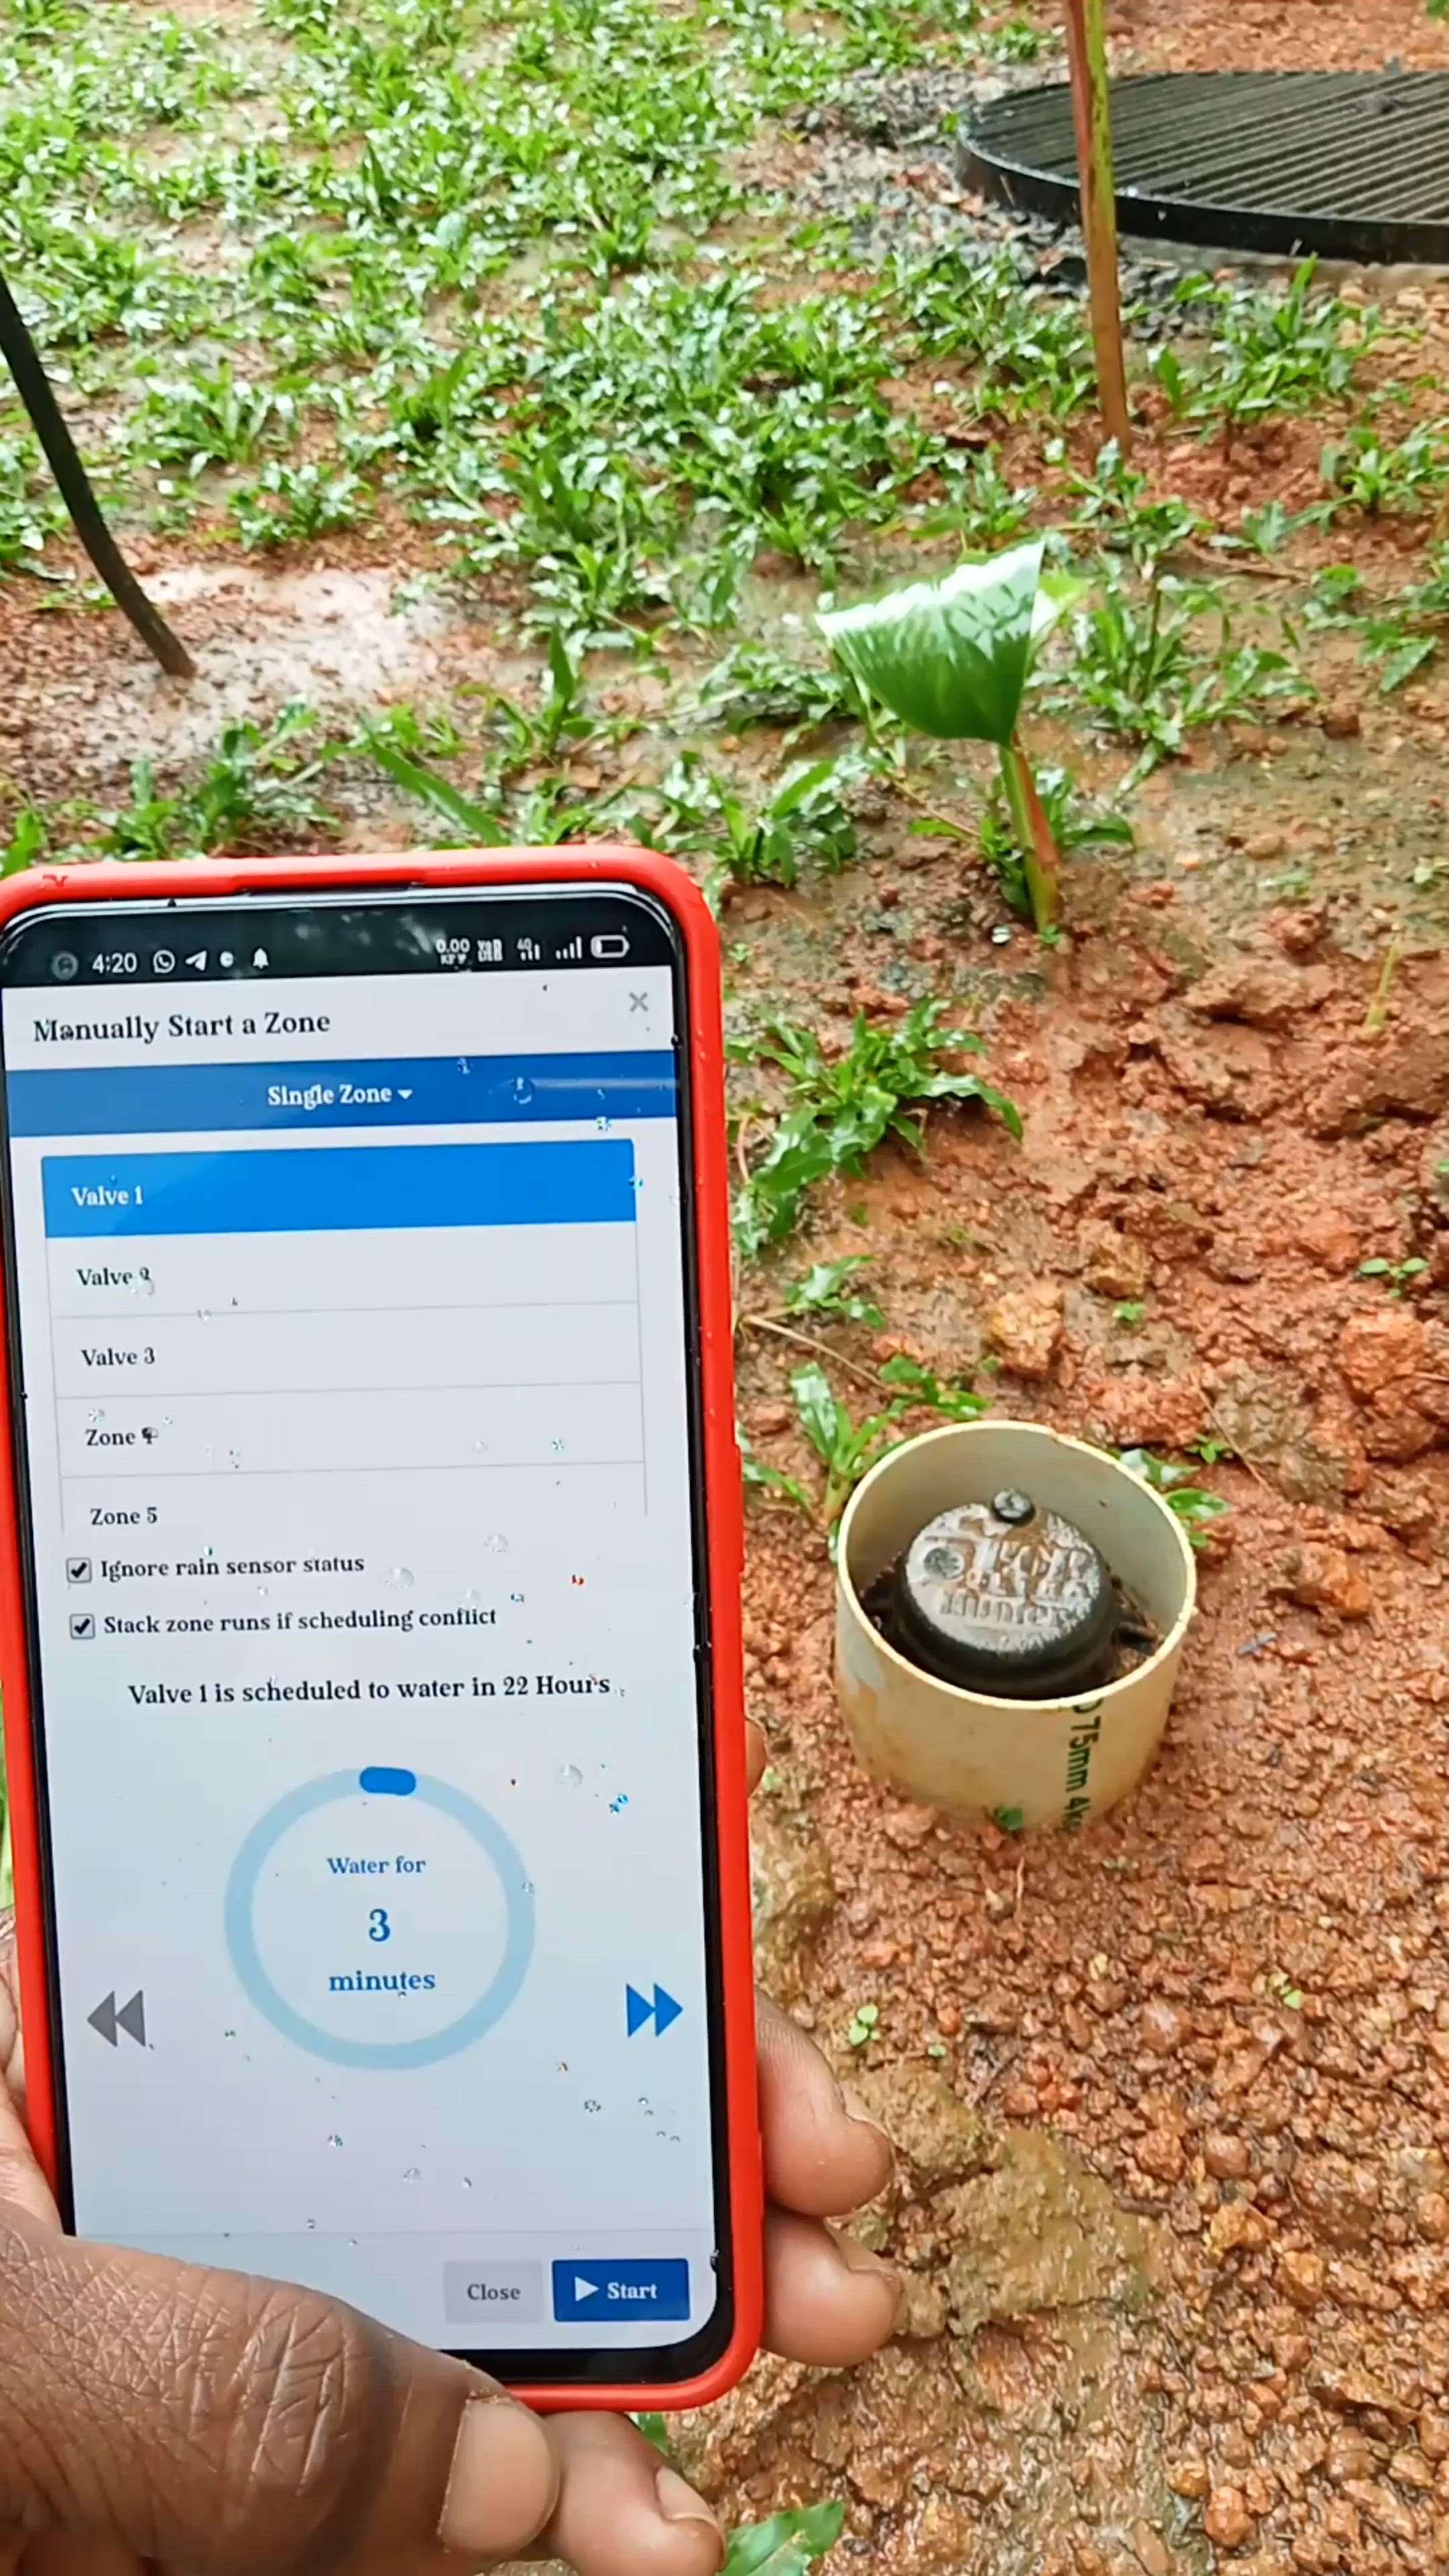 You can choose when to water your plants using pop up sprinklers using your smartphones
#LandscapeGarden #irrigation #sprinkler #popup #farming #LandscapeGarden #smartphones #outdoorlifestyle #sustainablelandscaping